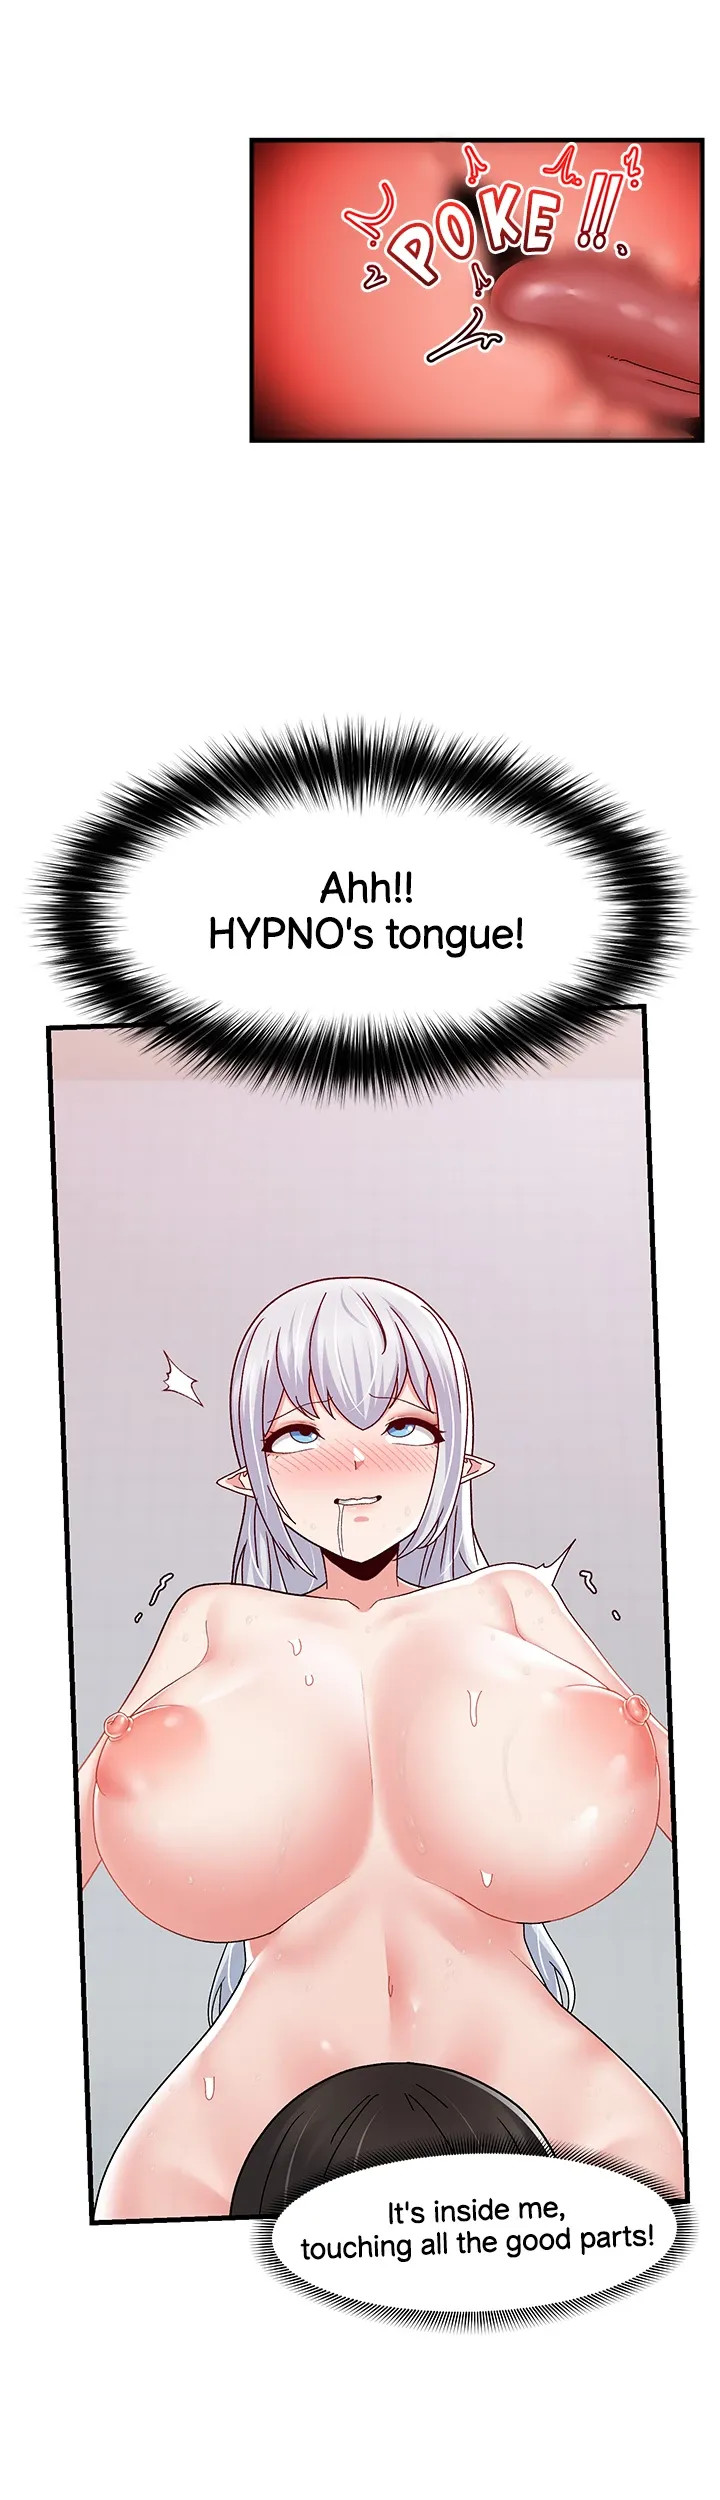 Absolute Hypnosis in Another World image